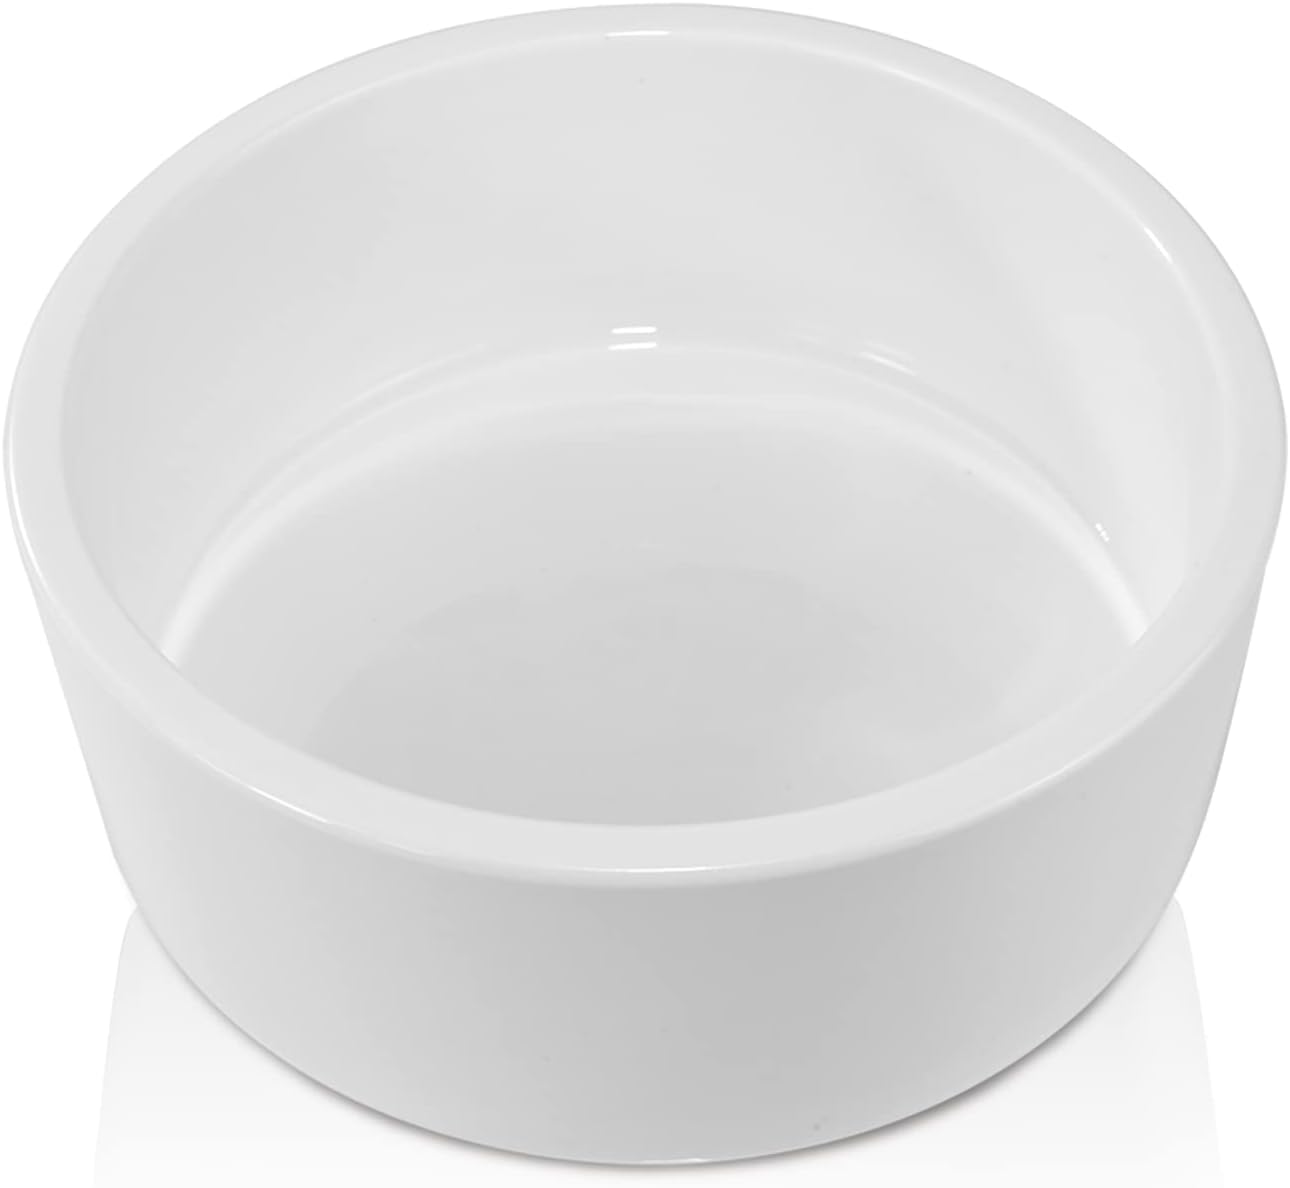 6 pack- Small Sublimation Pet bowl 4.9 x 2.8 inches with AAA Coating -  | Reinforced Styrofoam Packaging"